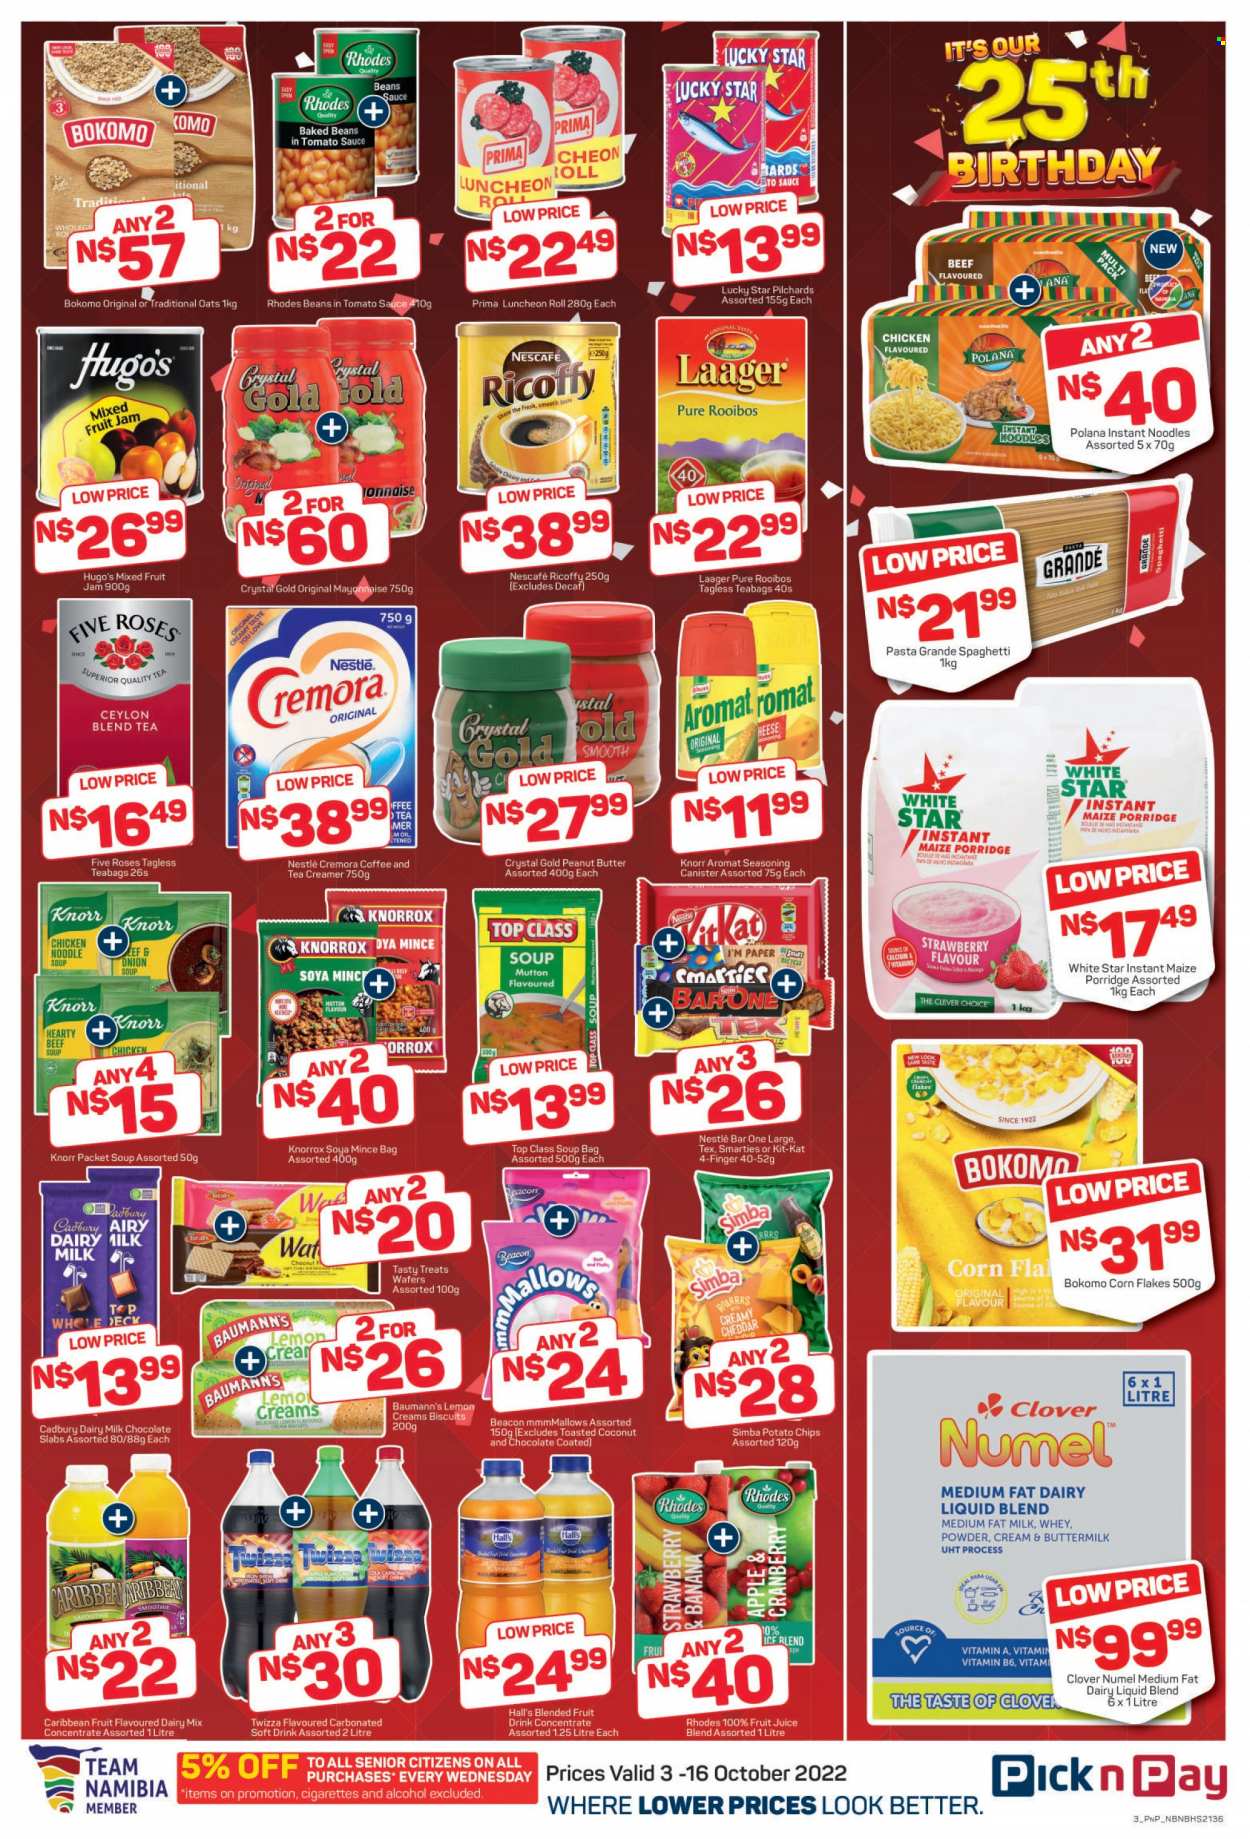 thumbnail - Pick n Pay catalogue  - 03/10/2022 - 16/10/2022 - Sales products - sardines, spaghetti, onion soup, soup, pasta, instant noodles, Knorr, noodles cup, noodles, lunch meat, cheese, buttermilk, creamer, coffee and tea creamer, mayonnaise, marshmallows, milk chocolate, Nestlé, wafers, chocolate slabs, Smarties, biscuit, Cadbury, Dairy Milk, potato chips, chips, Simba, oats, Cremora, soya mince, White Star, Knorrox, baked beans, corn flakes, porridge, Pasta Grandé, spice, oil, fruit jam, peanut butter, fruit drink, fruit juice, juice, soft drink, smoothie, carbonated soft drink, tea, tea bags, rooibos tea, coffee, Ricoffy, Nescafé, alcohol, Ron Pelicano. Page 4.